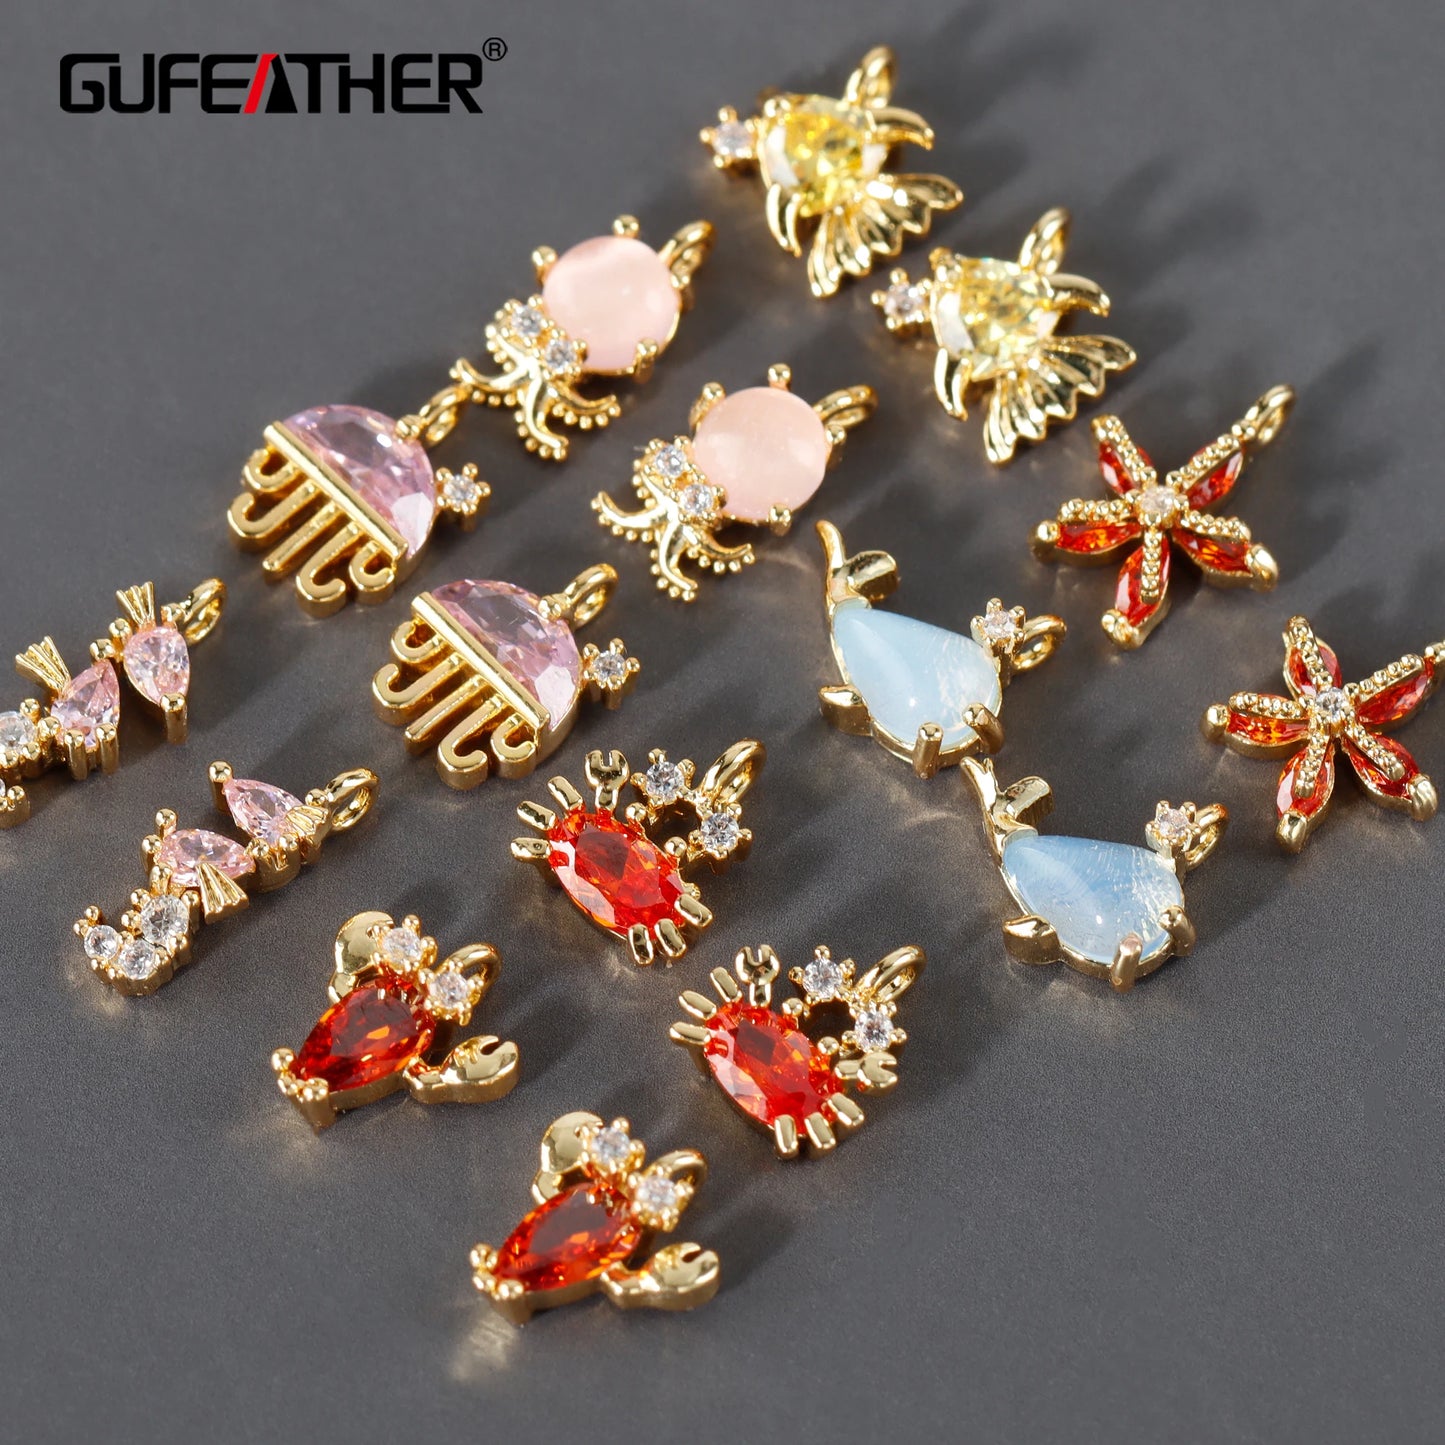 GUFEATHER M1004,jewelry accessories,pass REACH,nickel free,18k gold plated,copper,zircons,jewelry making,diy pendants,6pcs/lot